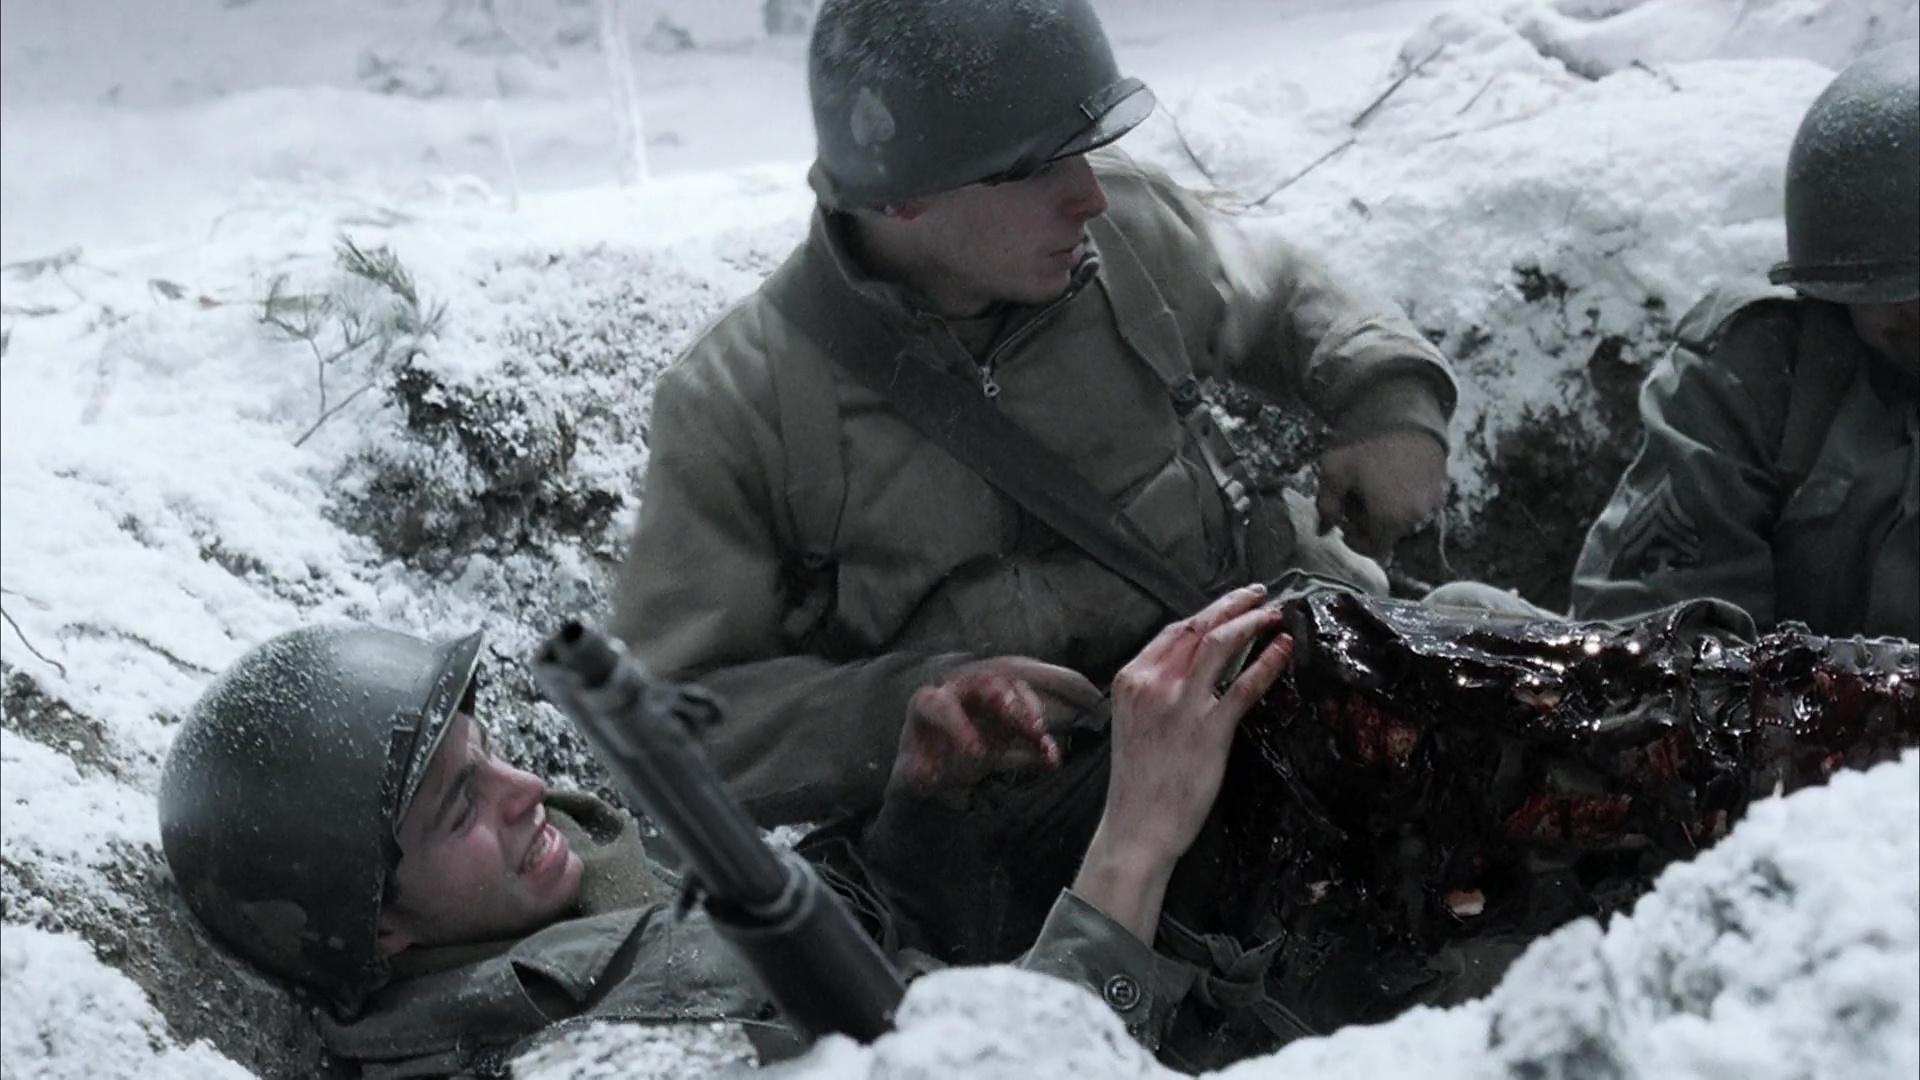 Band of Brothers (TV Miniseries) .